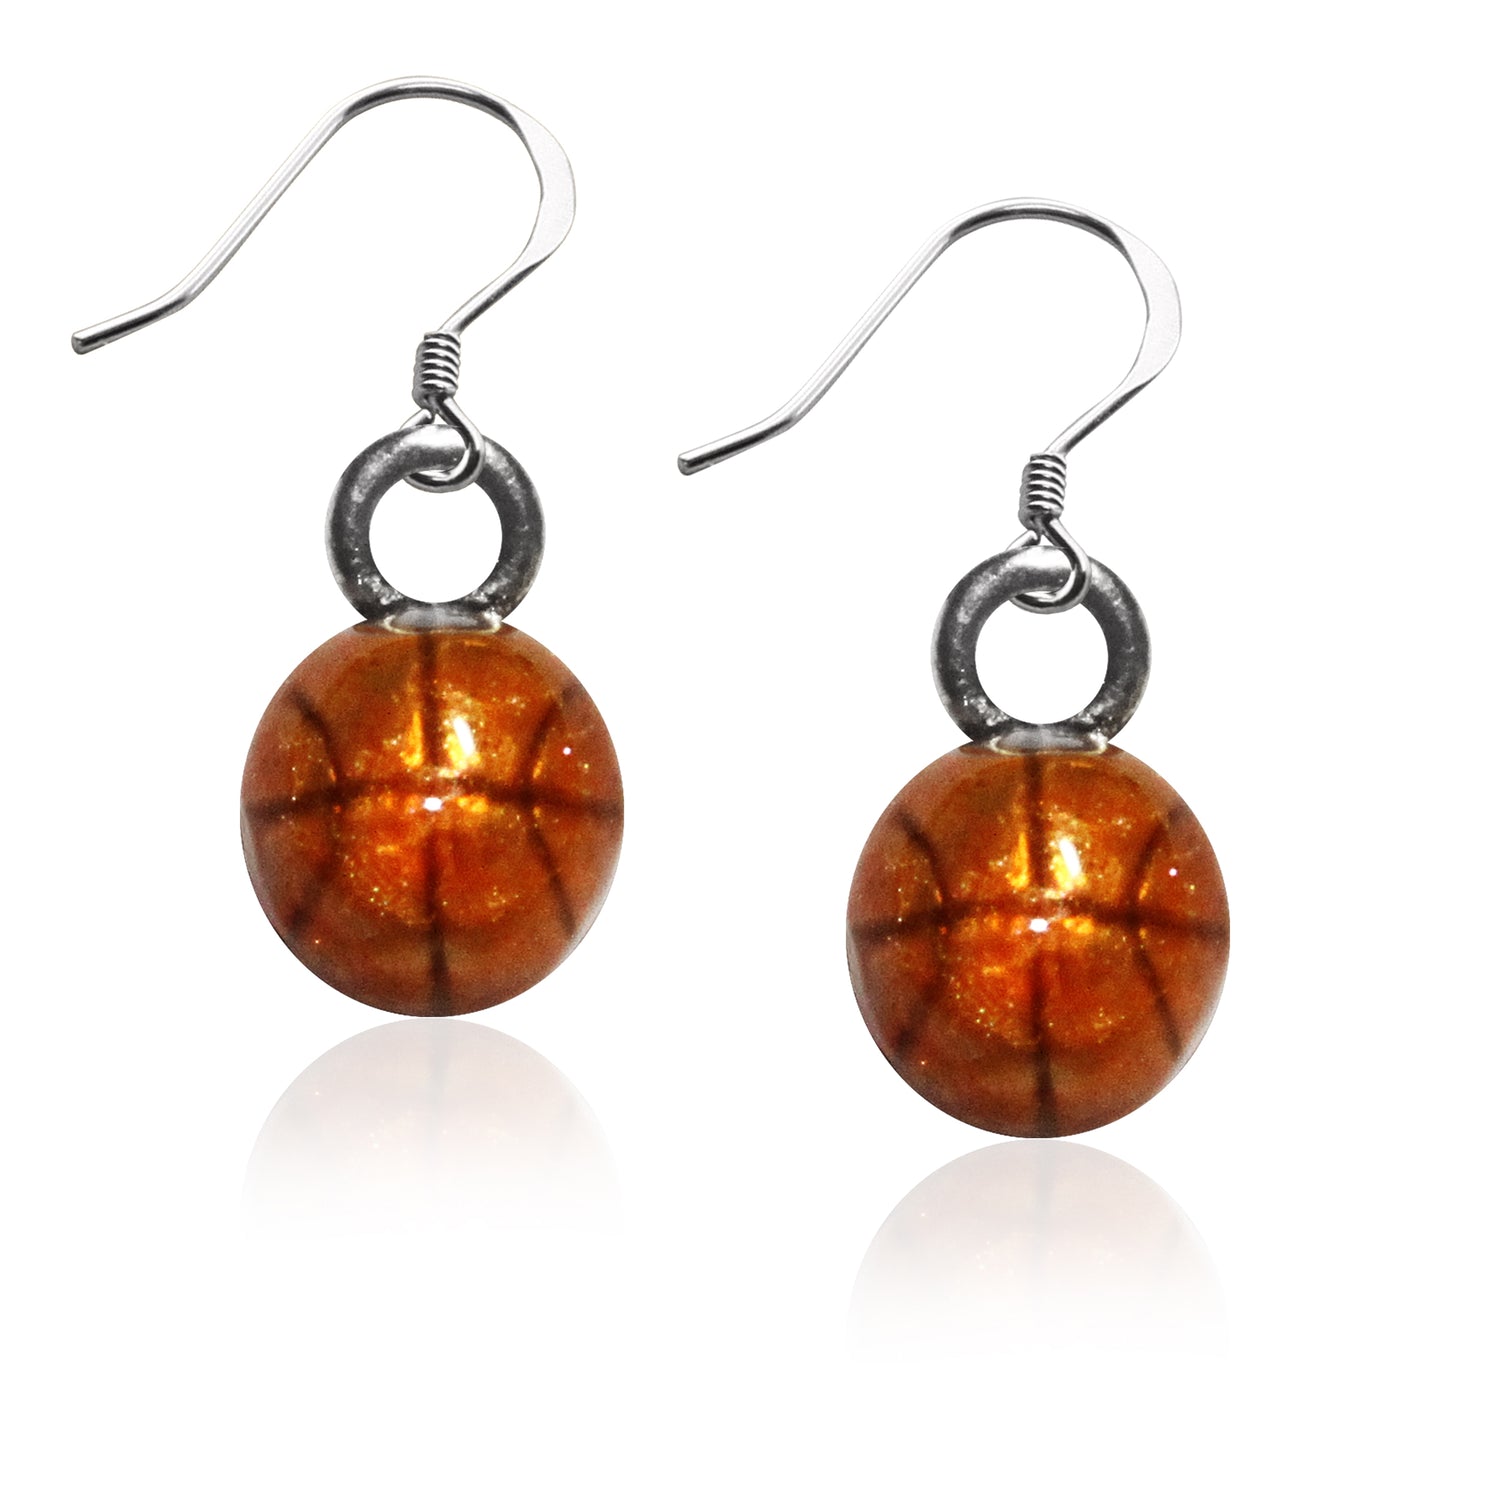 Whimsical Gifts | Basketball Charm Earrings in Silver Finish | Hobbies & Special Interests | Sports | Jewelry